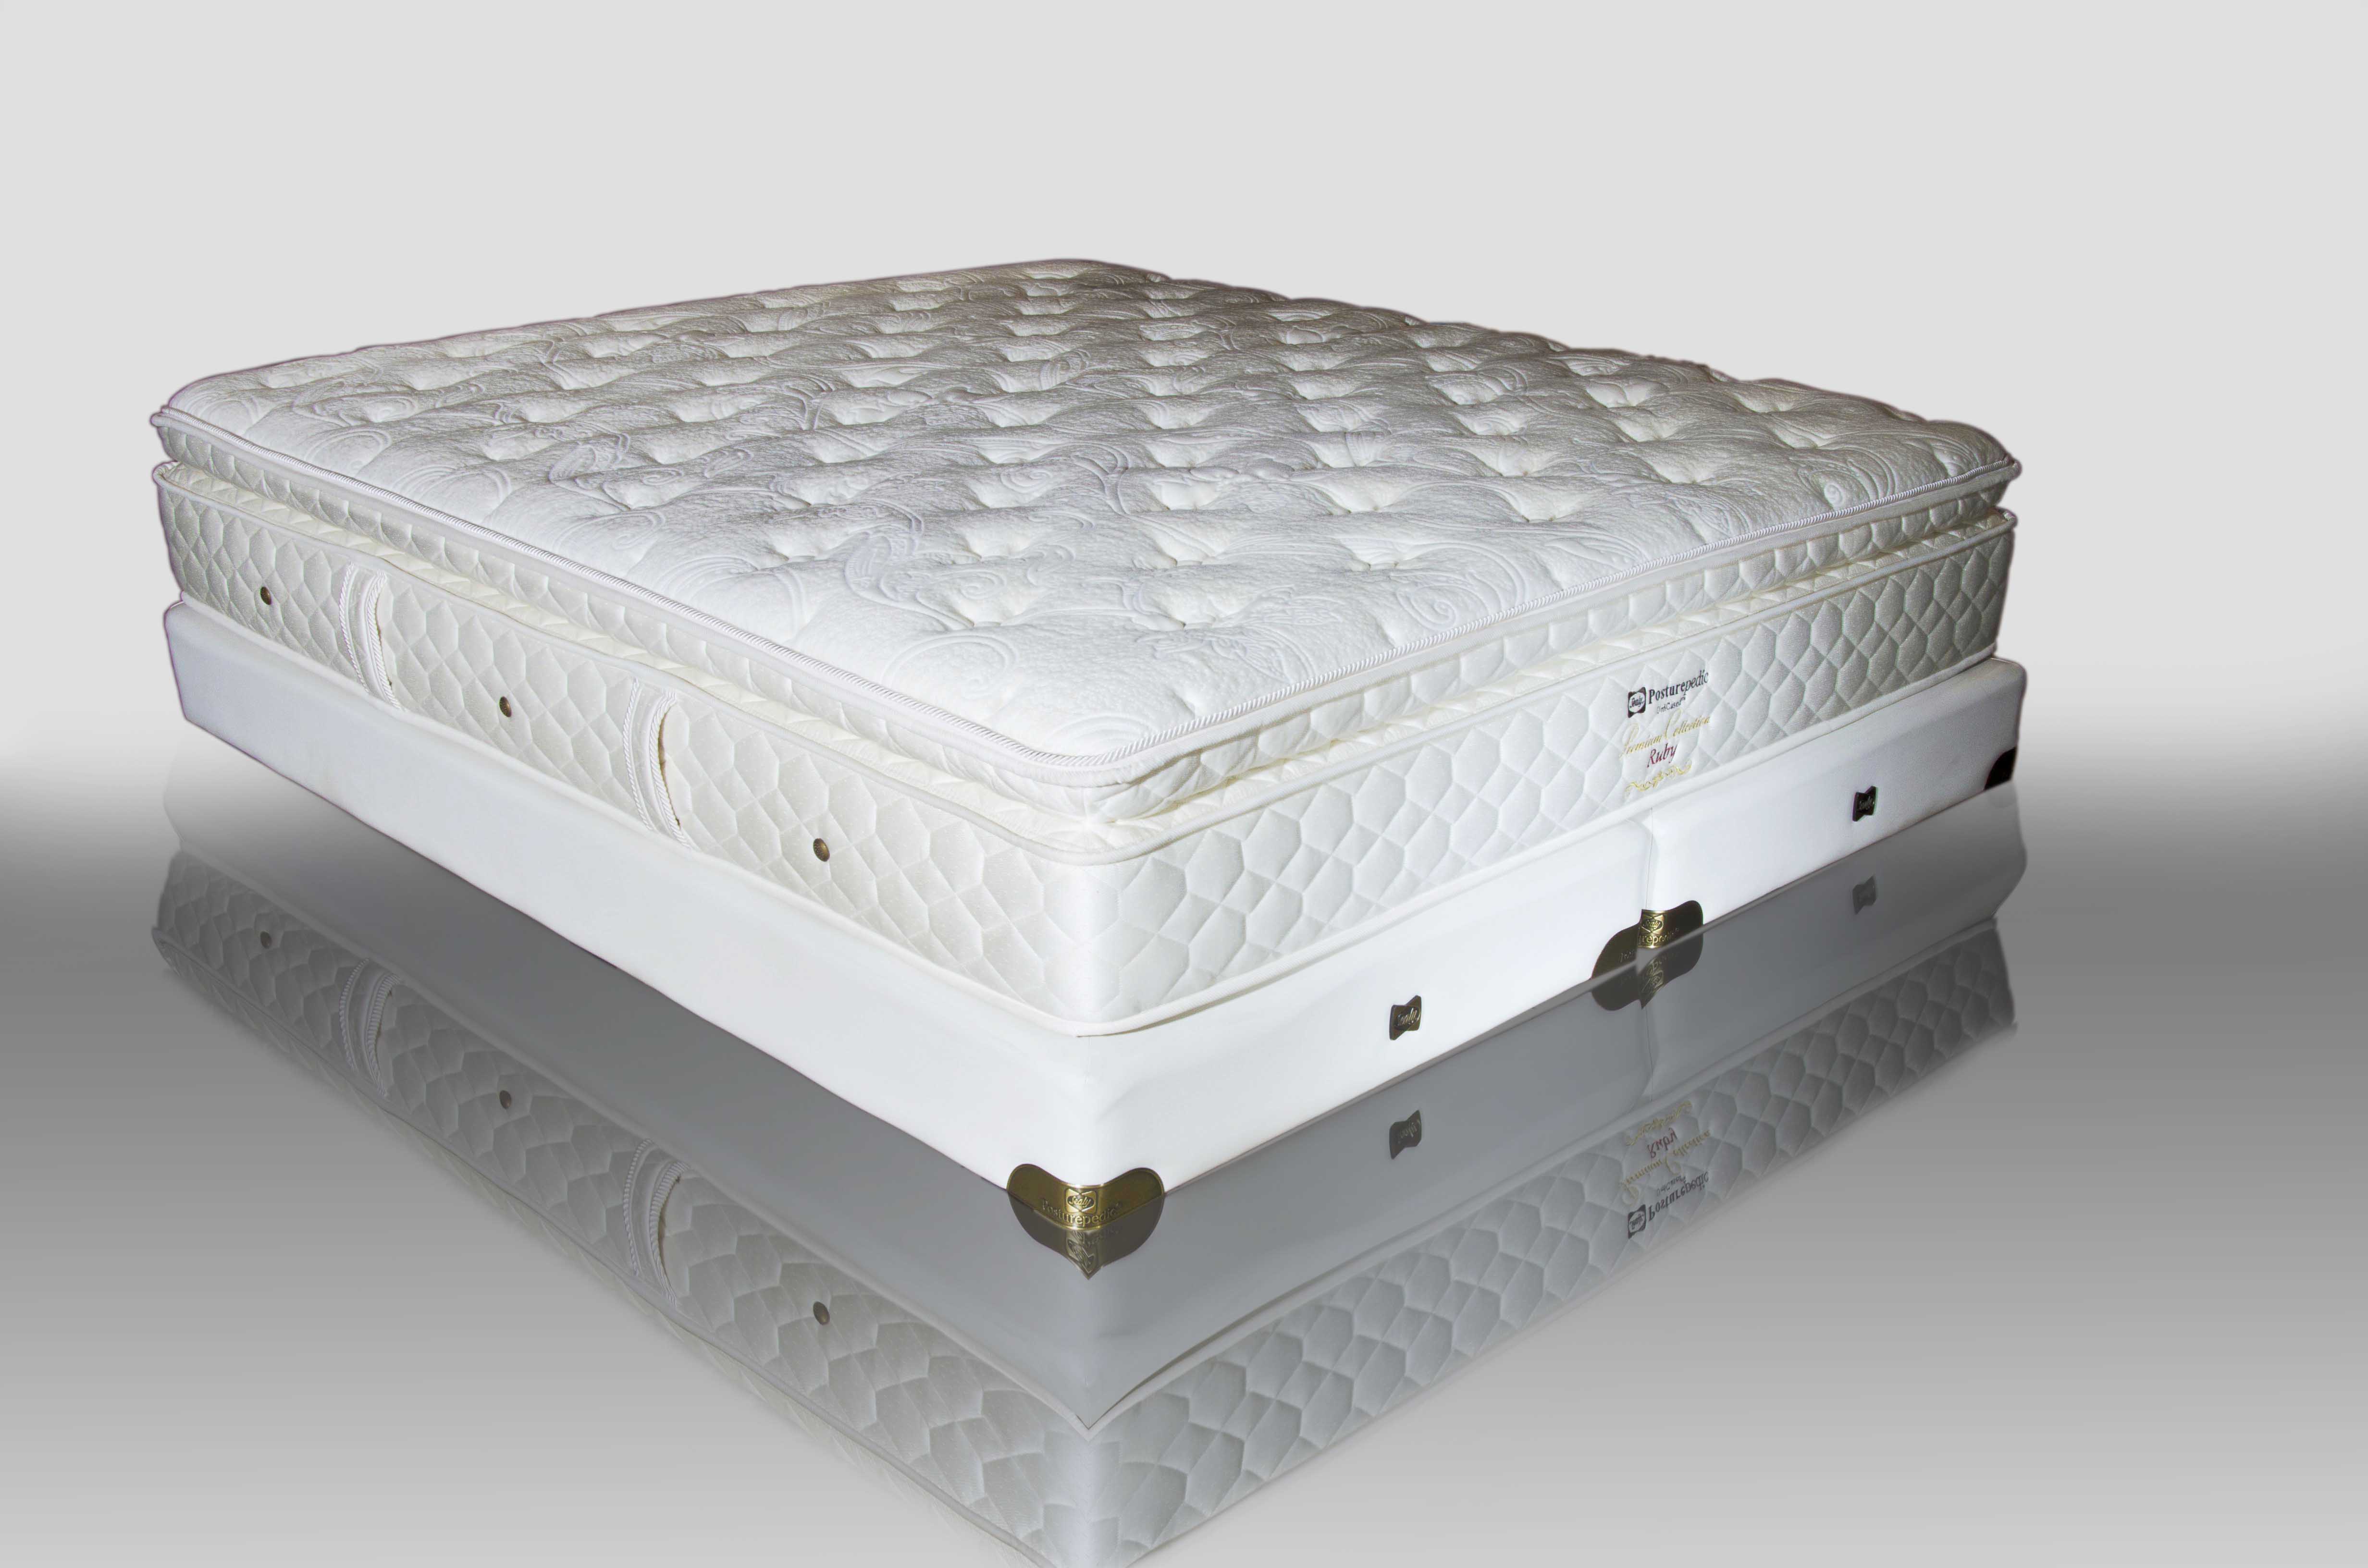 sealy the sef-proclaimed largest manufacturer of mattresses